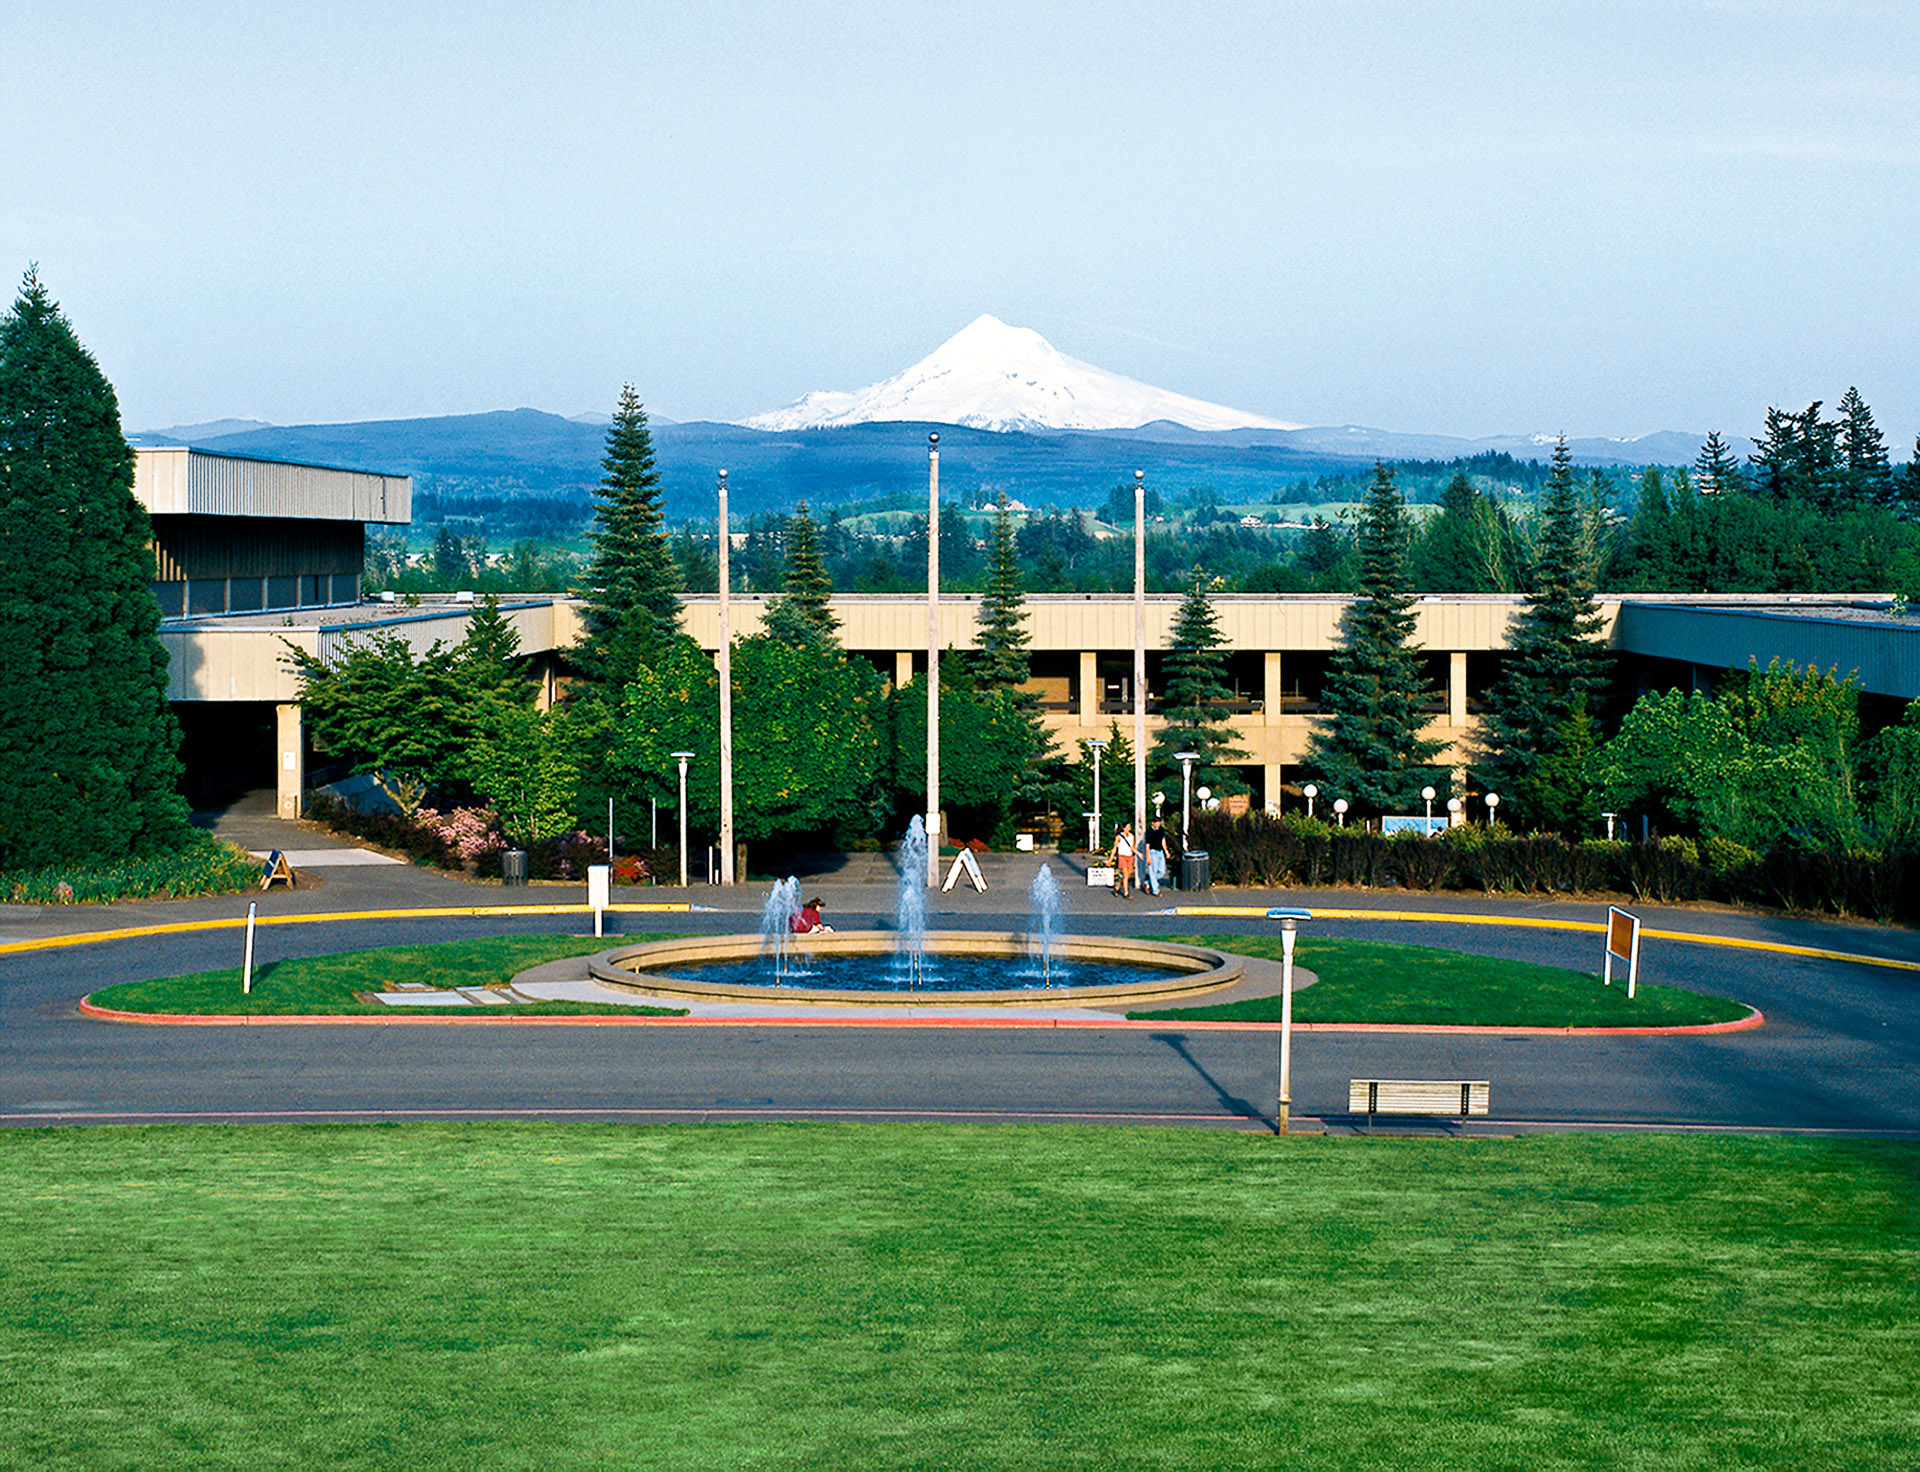 Image of MHCC Gresham campus with fountain in front and Mt. Hood in the background